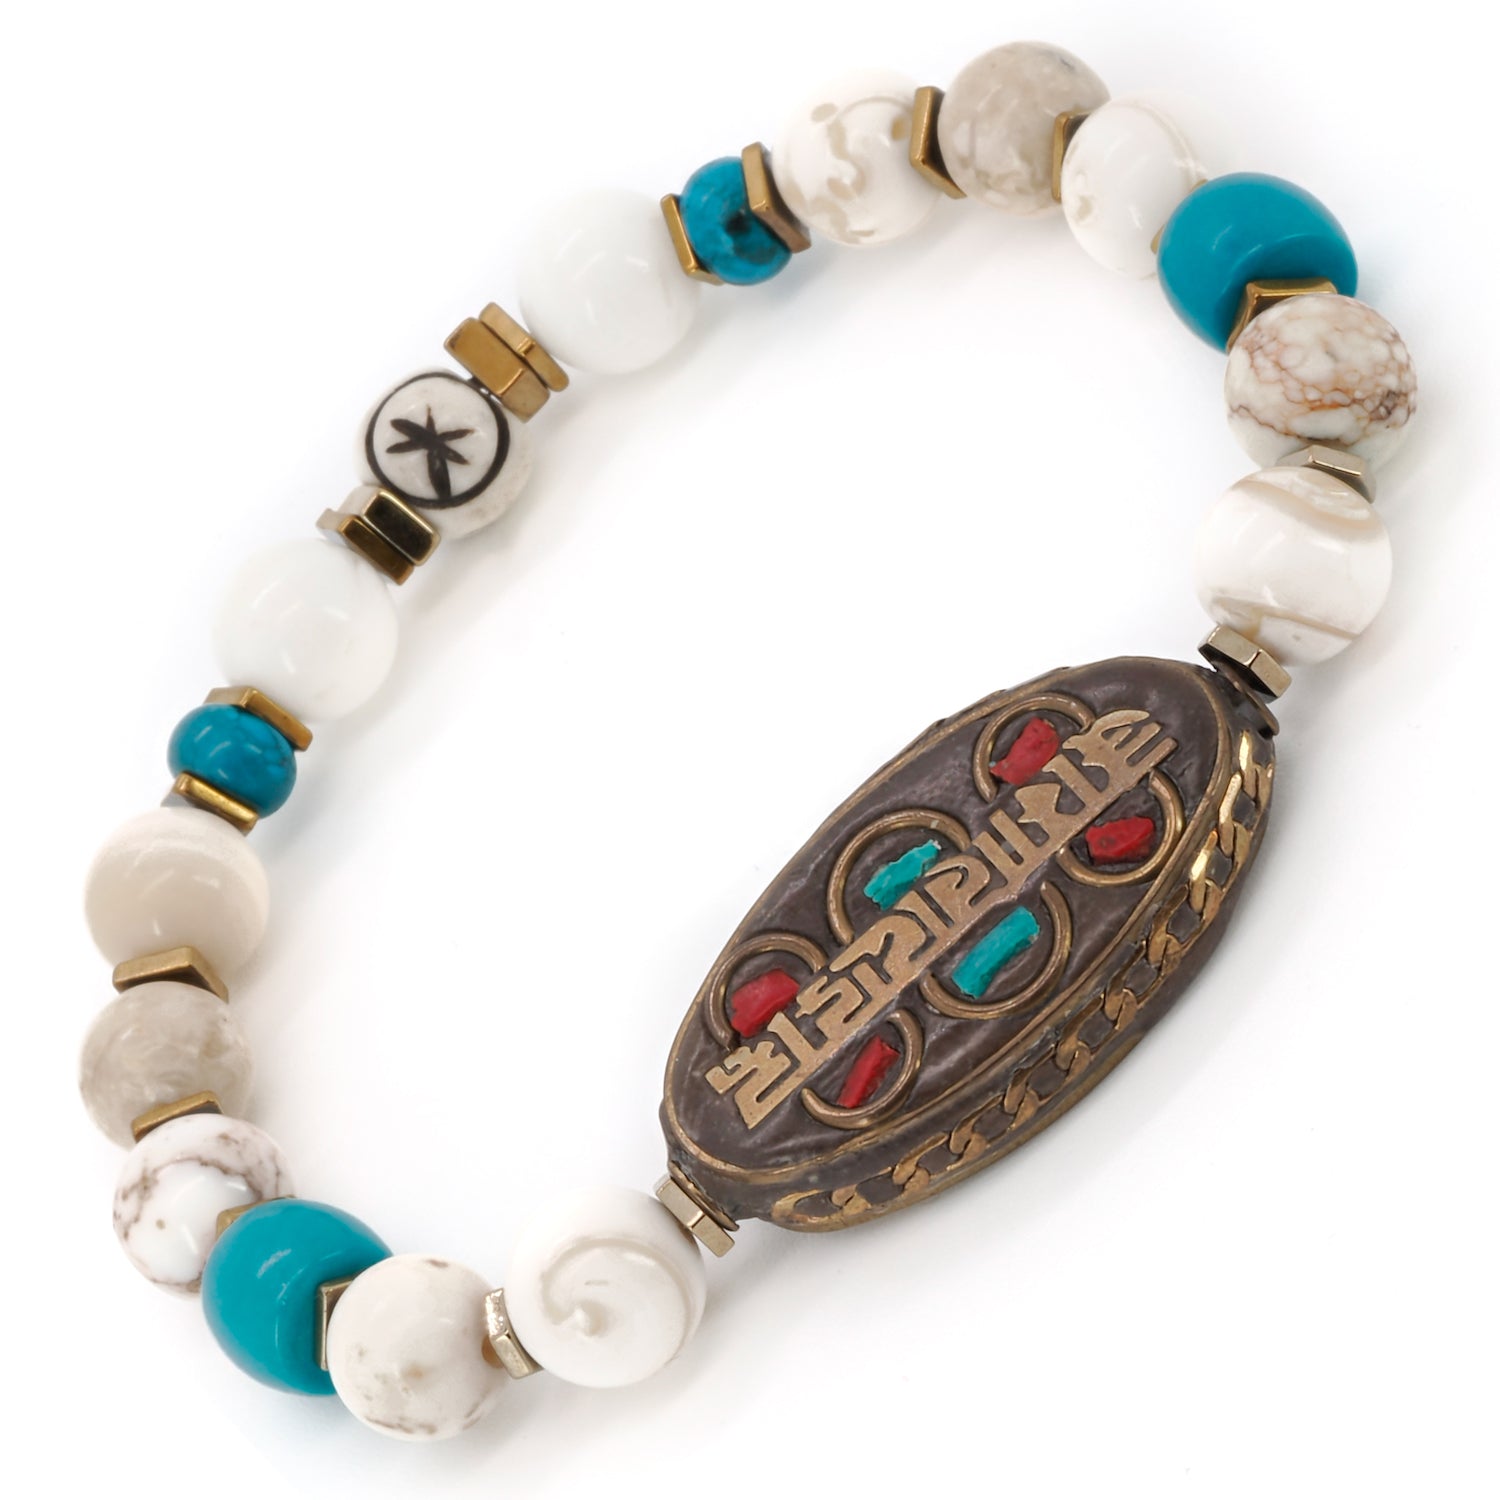 Elevate your spiritual practice with the Om Mani Padme Hum Nepal Bracelet, a meaningful accessory inspired by Nepalese traditions.